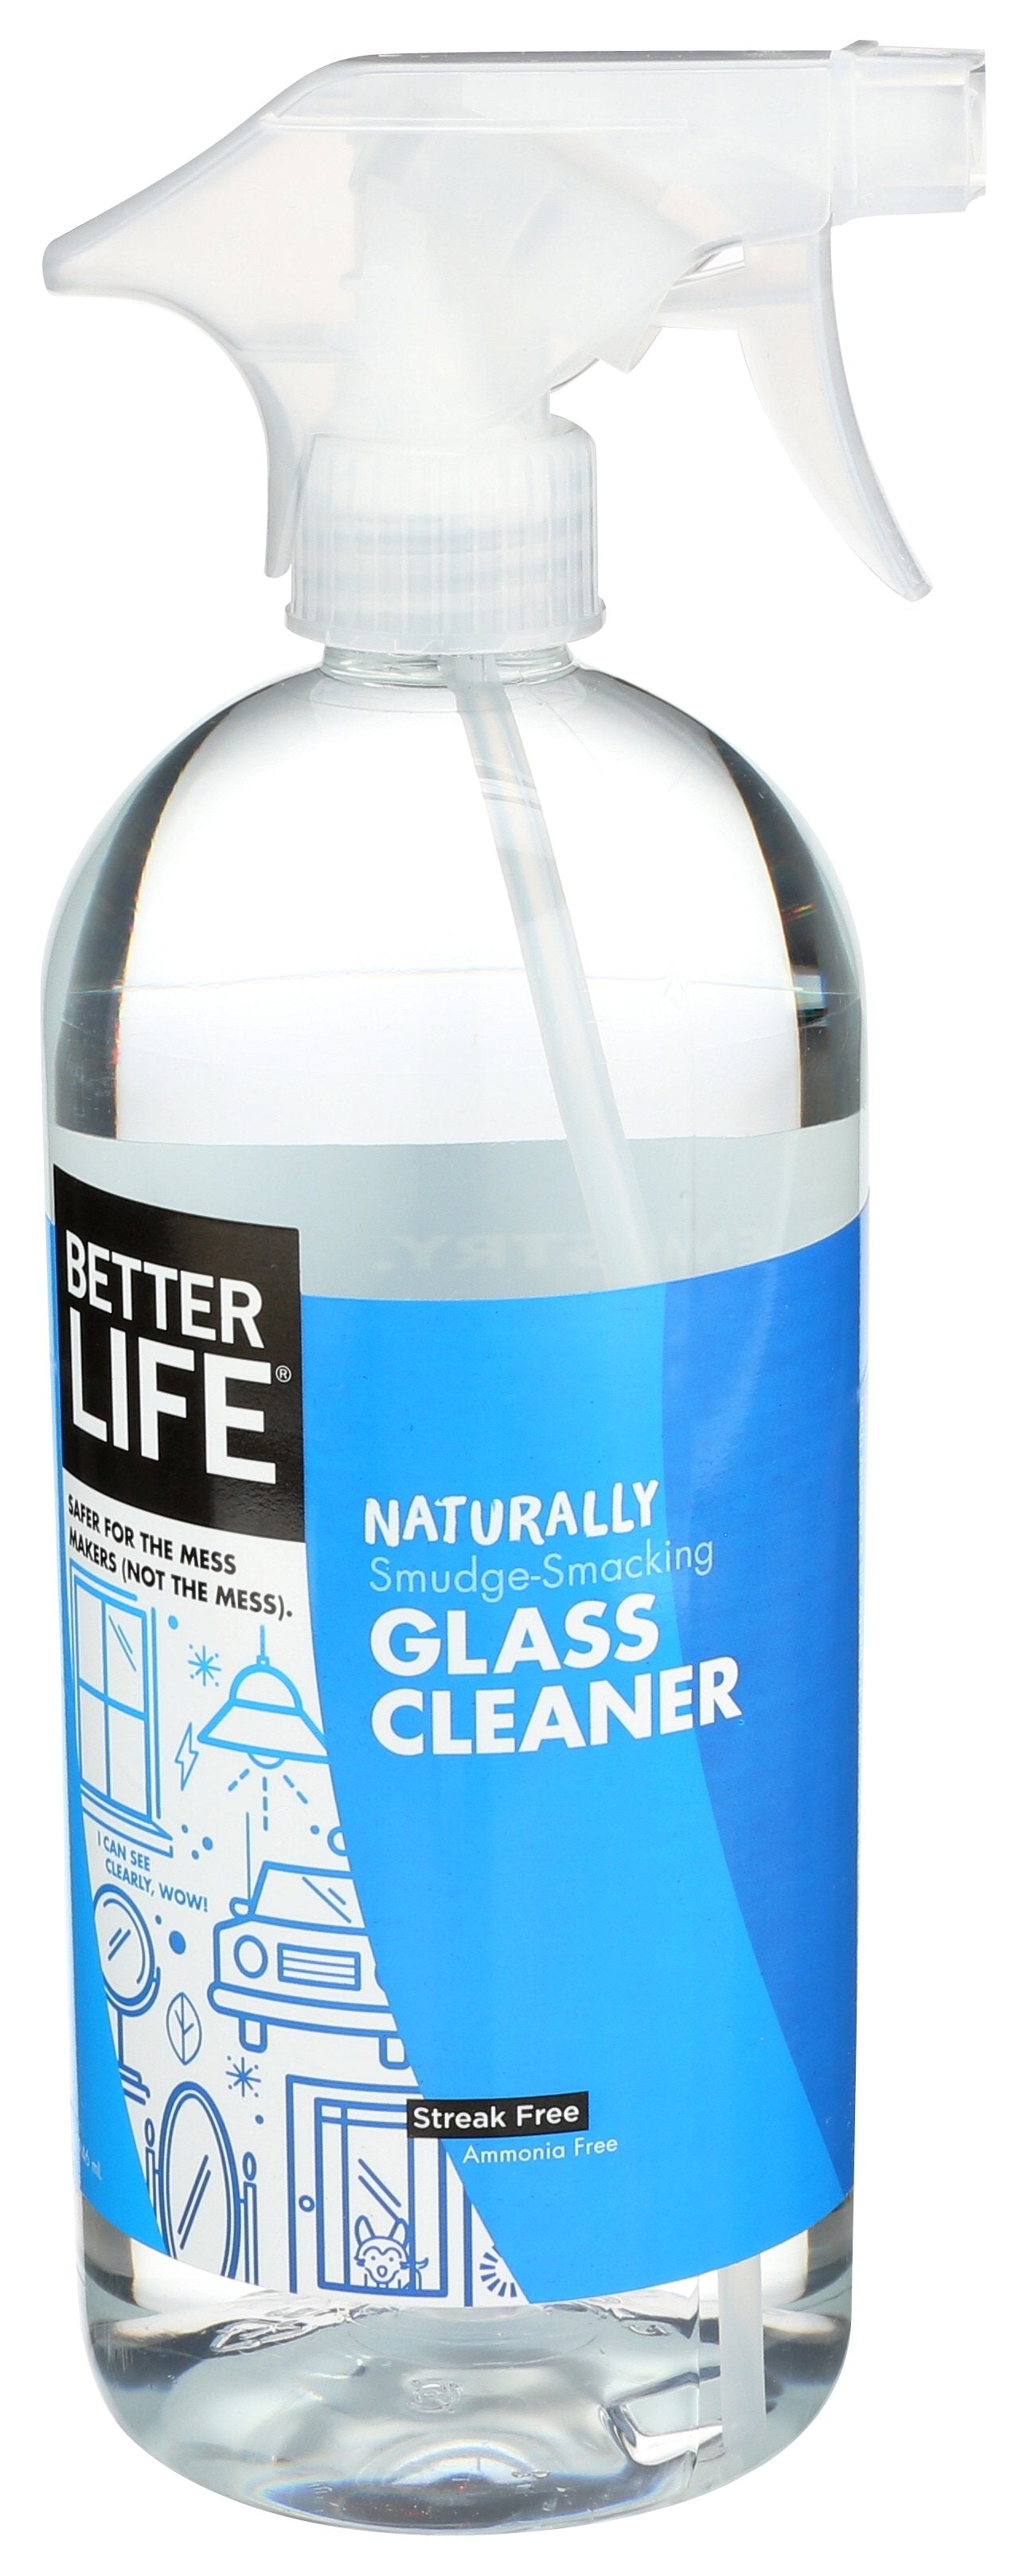 BETTER LIFE CLNR GLASS SEE CLRLY NOW - Case of 6